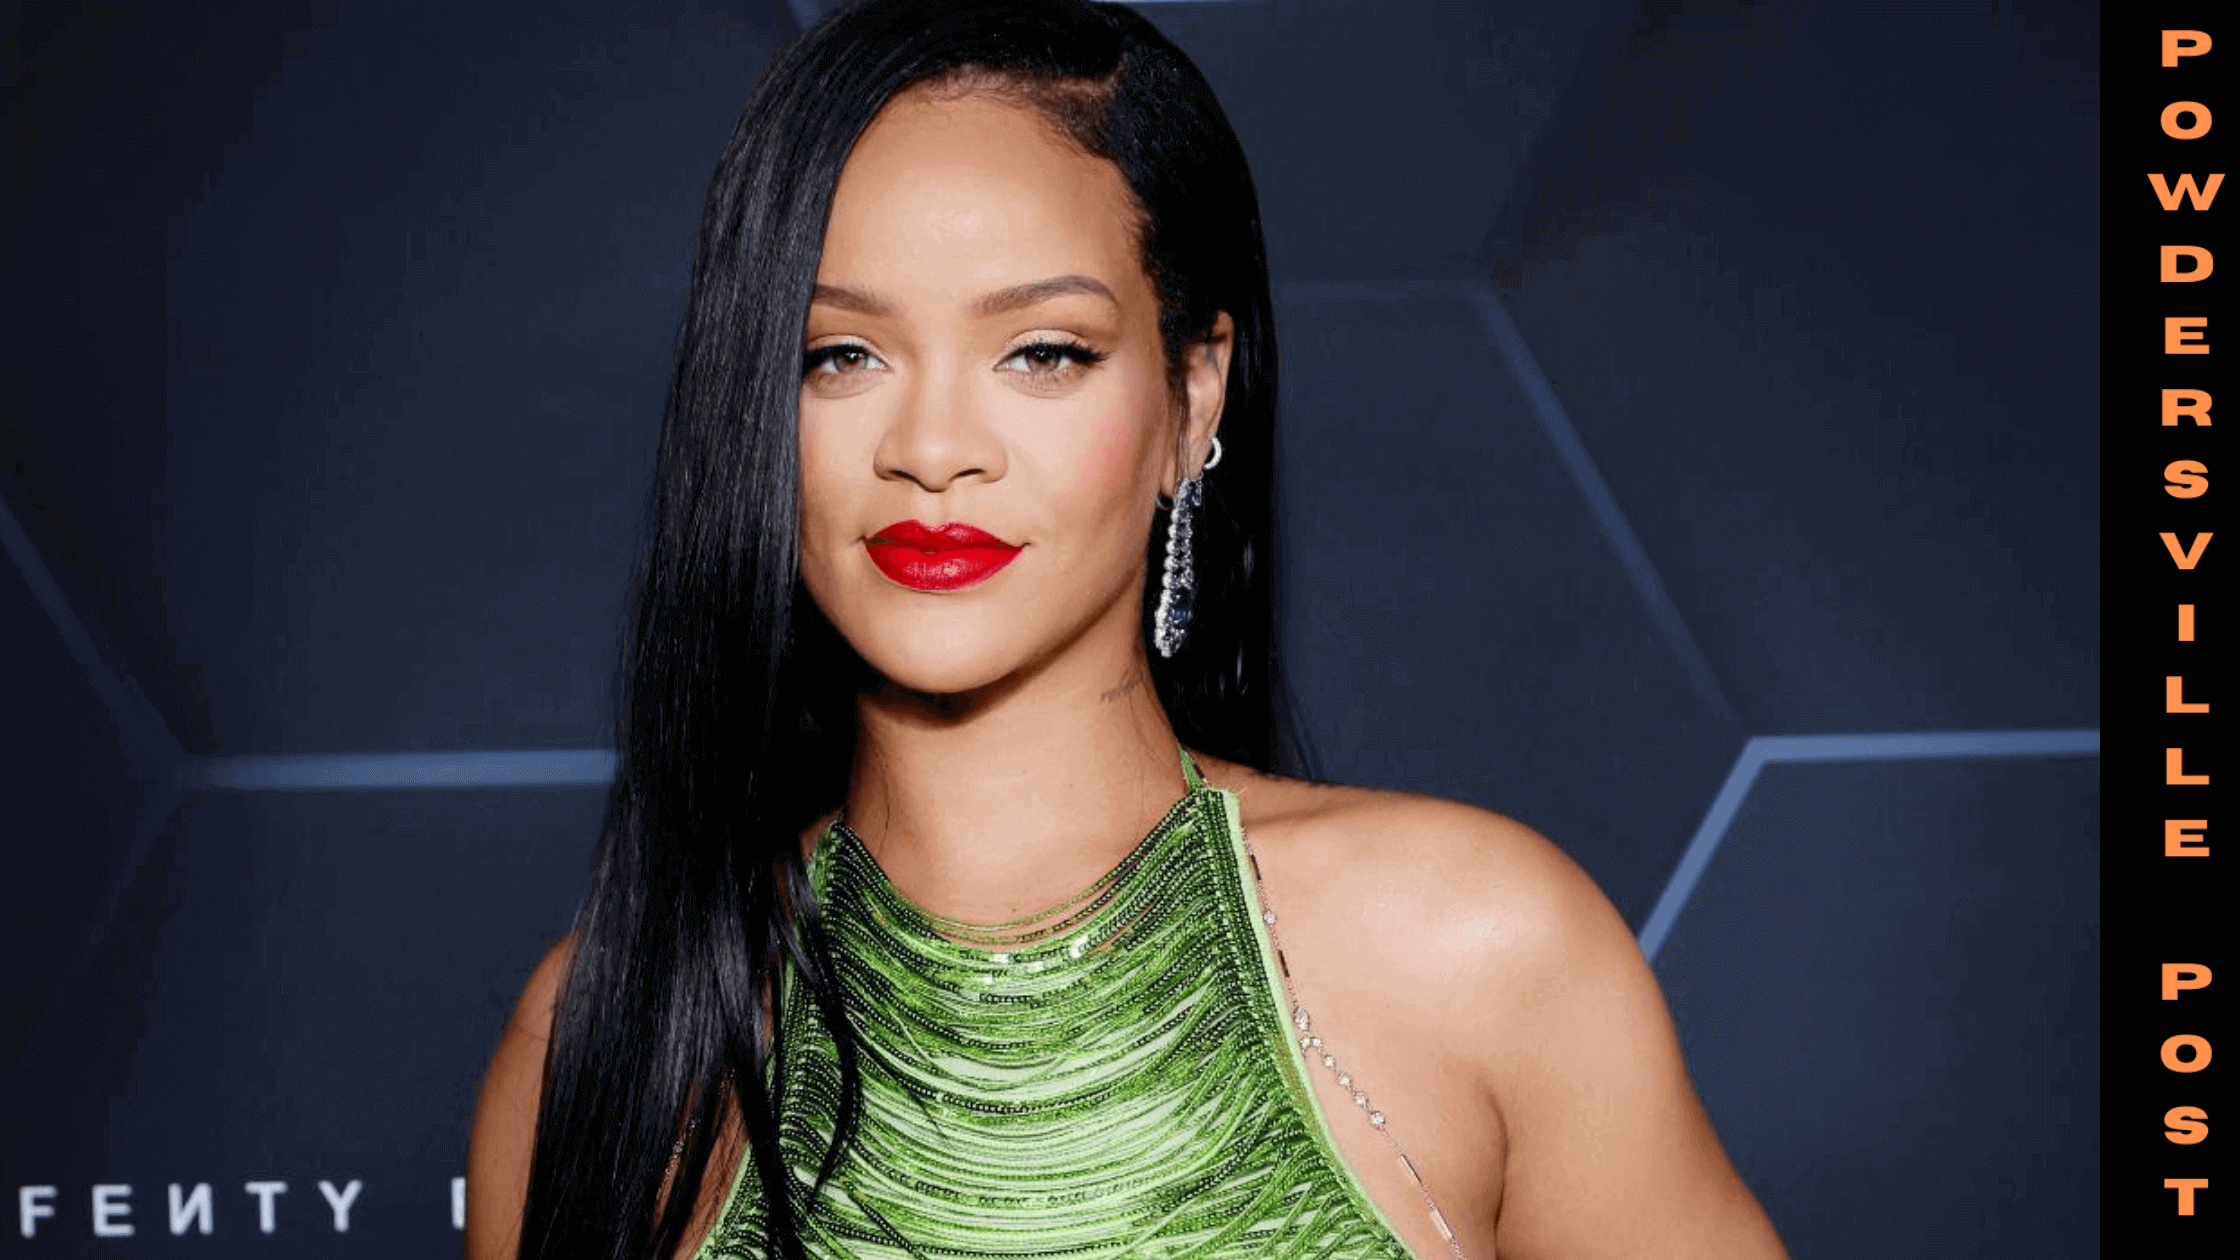 Top Things To Know About Famous Pop Singer Rihanna Net Worth In 2022, Age, Salary, Family, Career